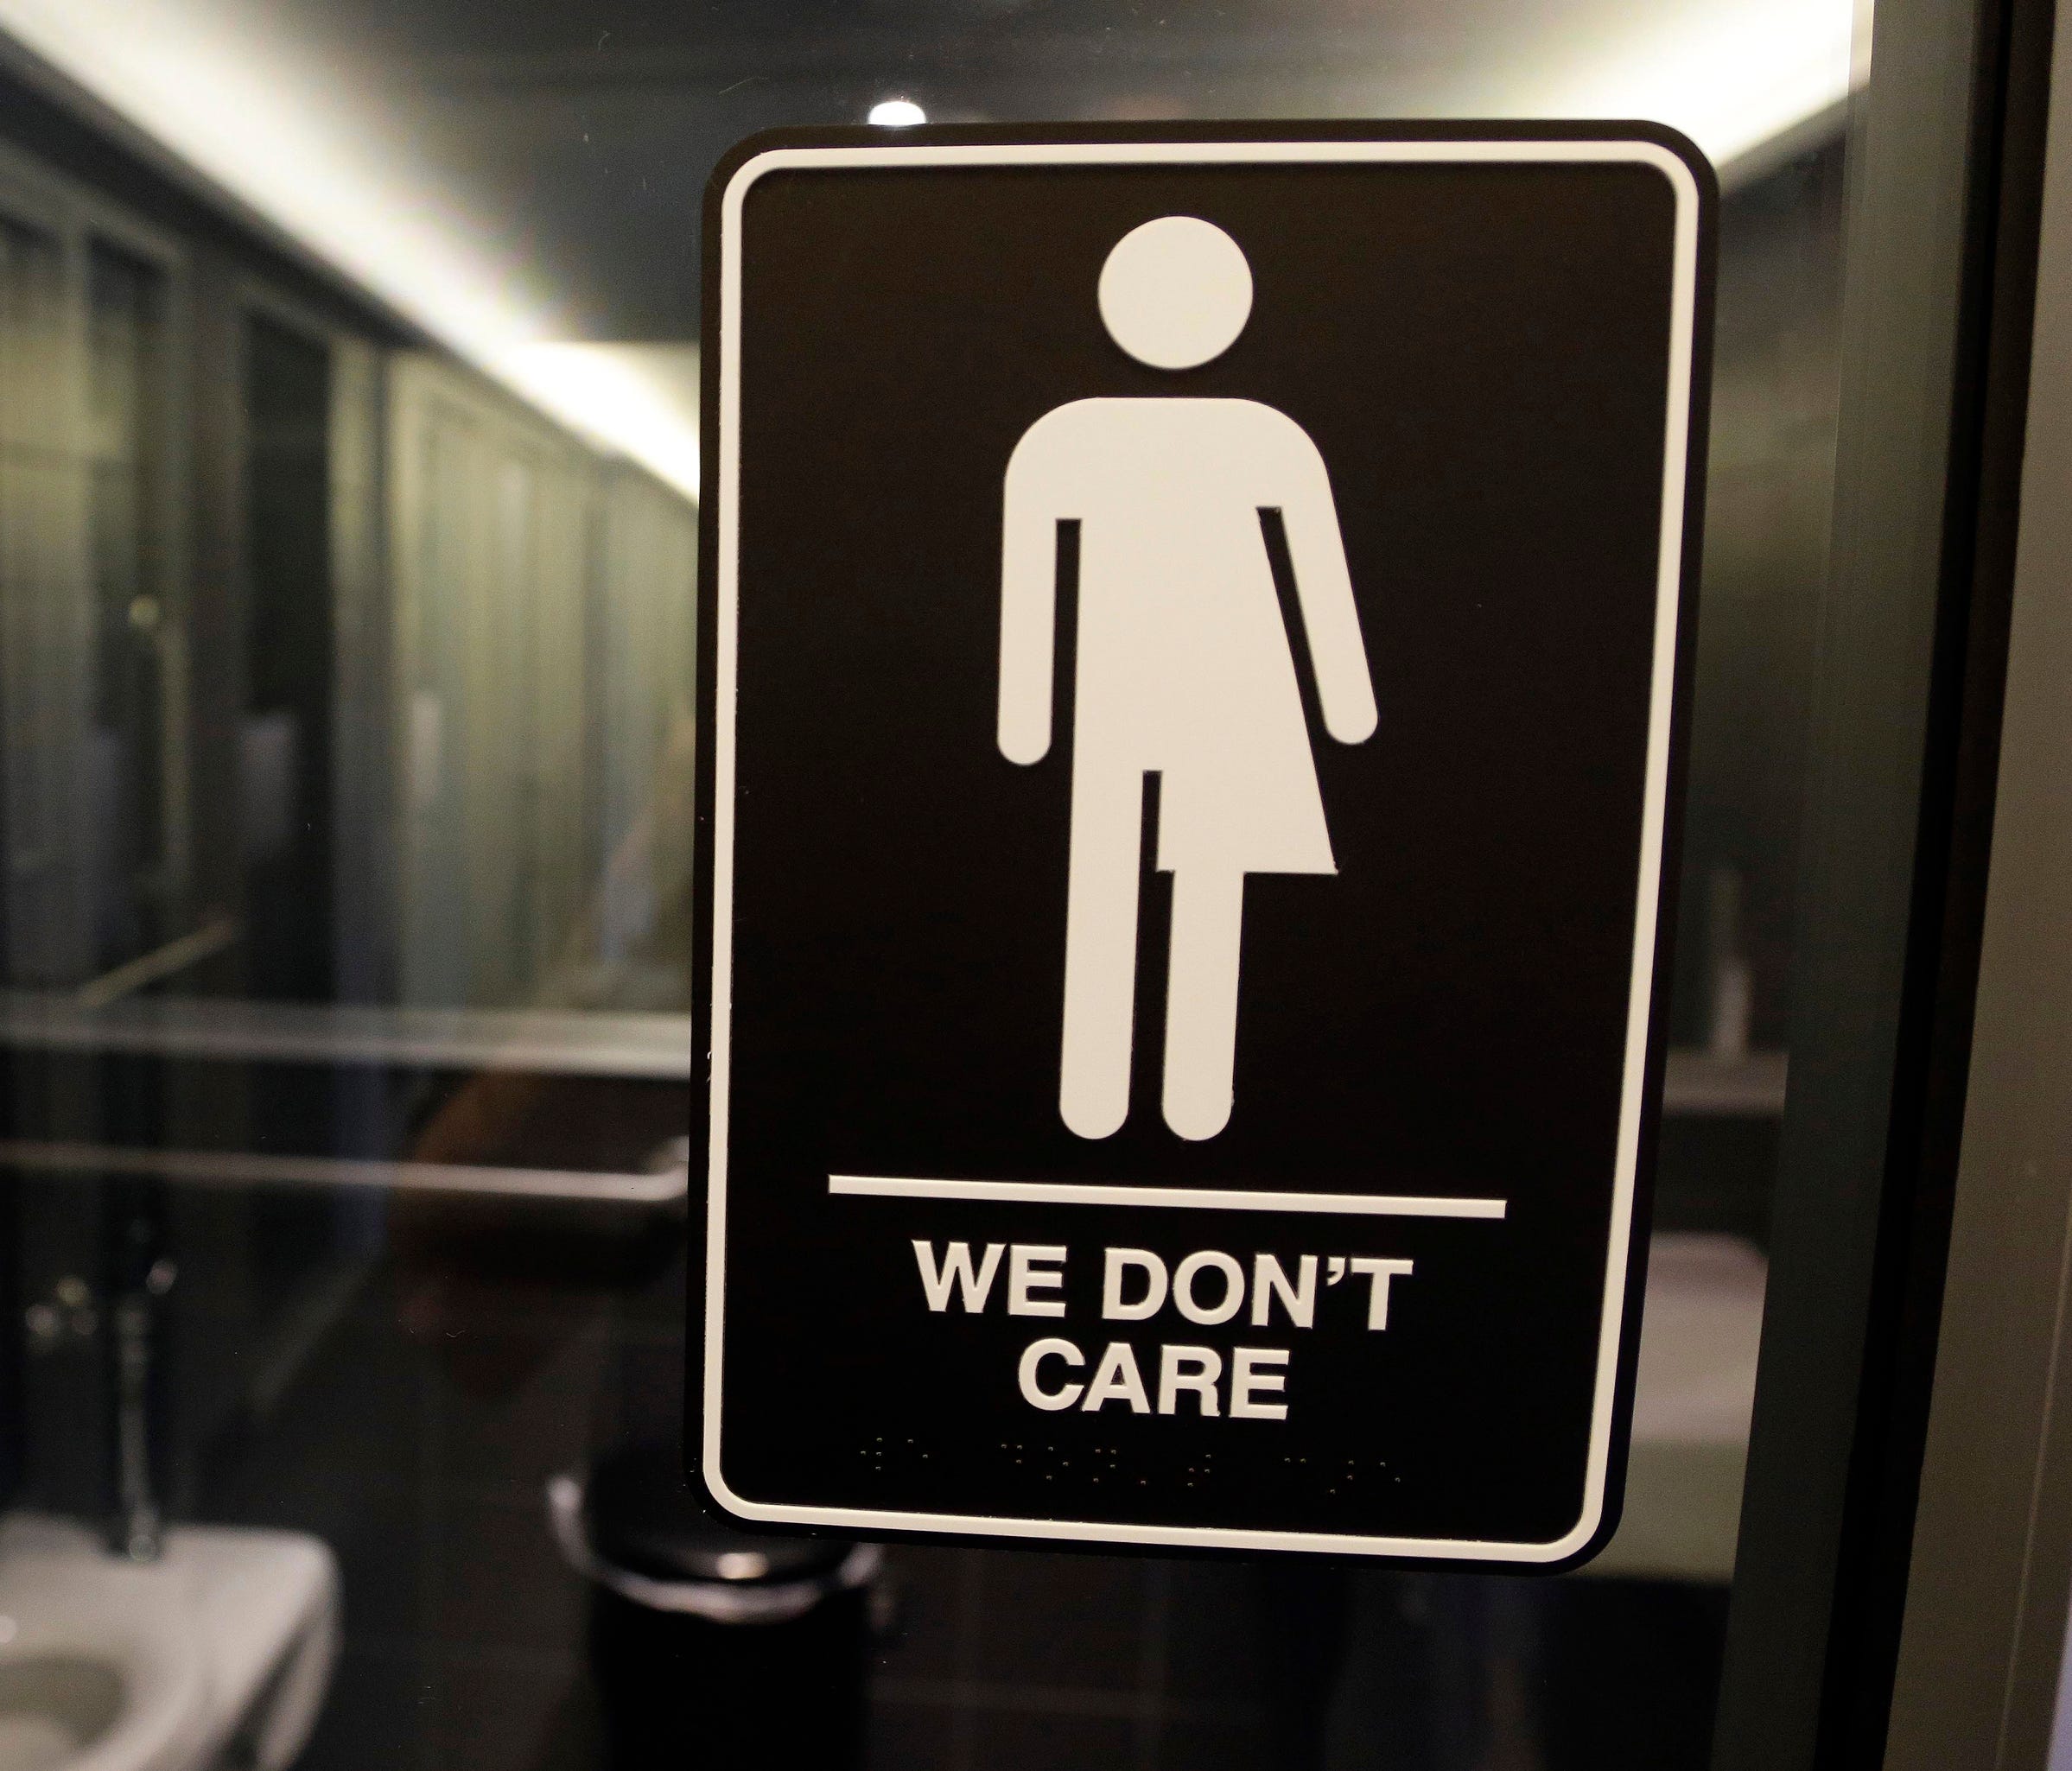 Signage hangs outside a restroom at 21c Museum Hotel in Durham, N.C.